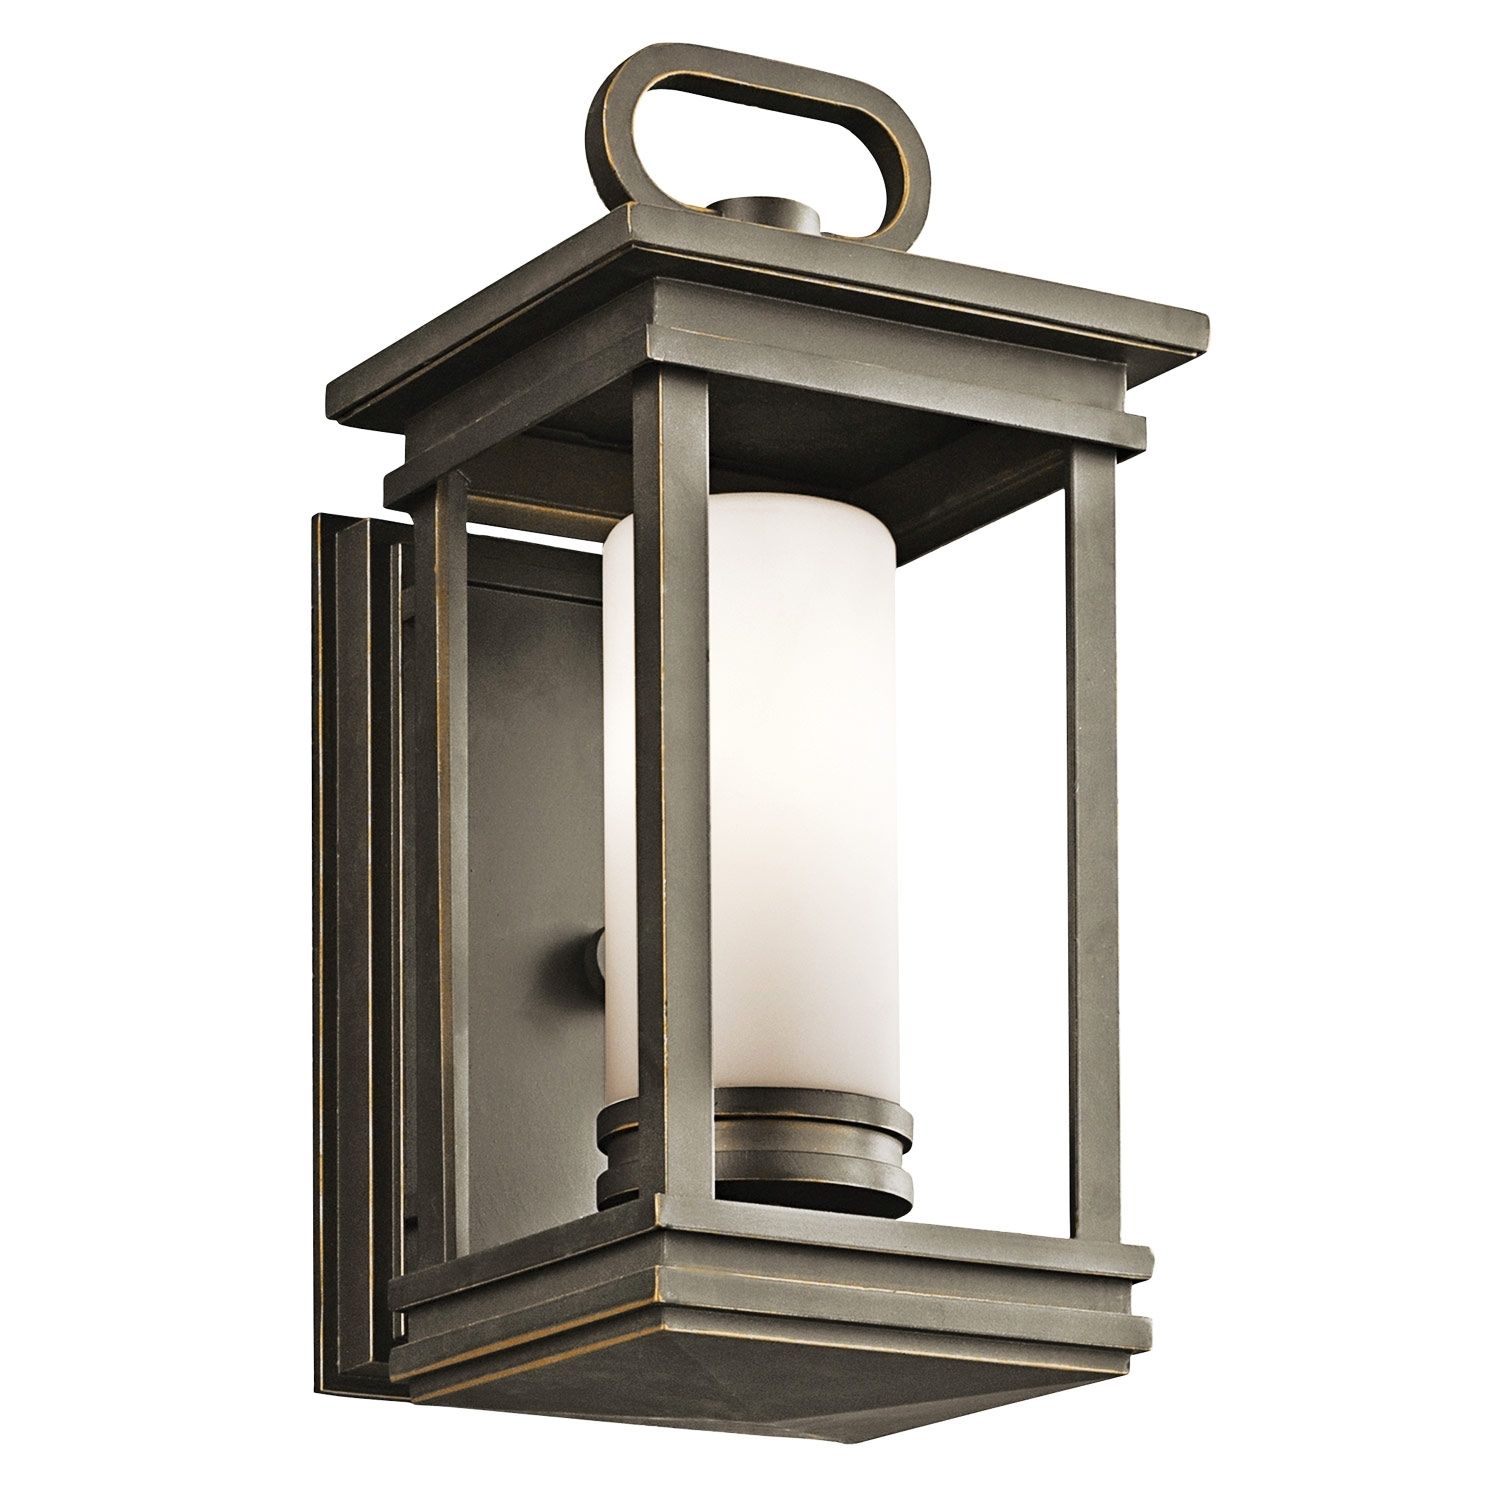 Fixtures Light : Excellent Outdoor Wall Lighting Brushed Nickel Intended For Outdoor Lanterns At Argos (View 3 of 20)